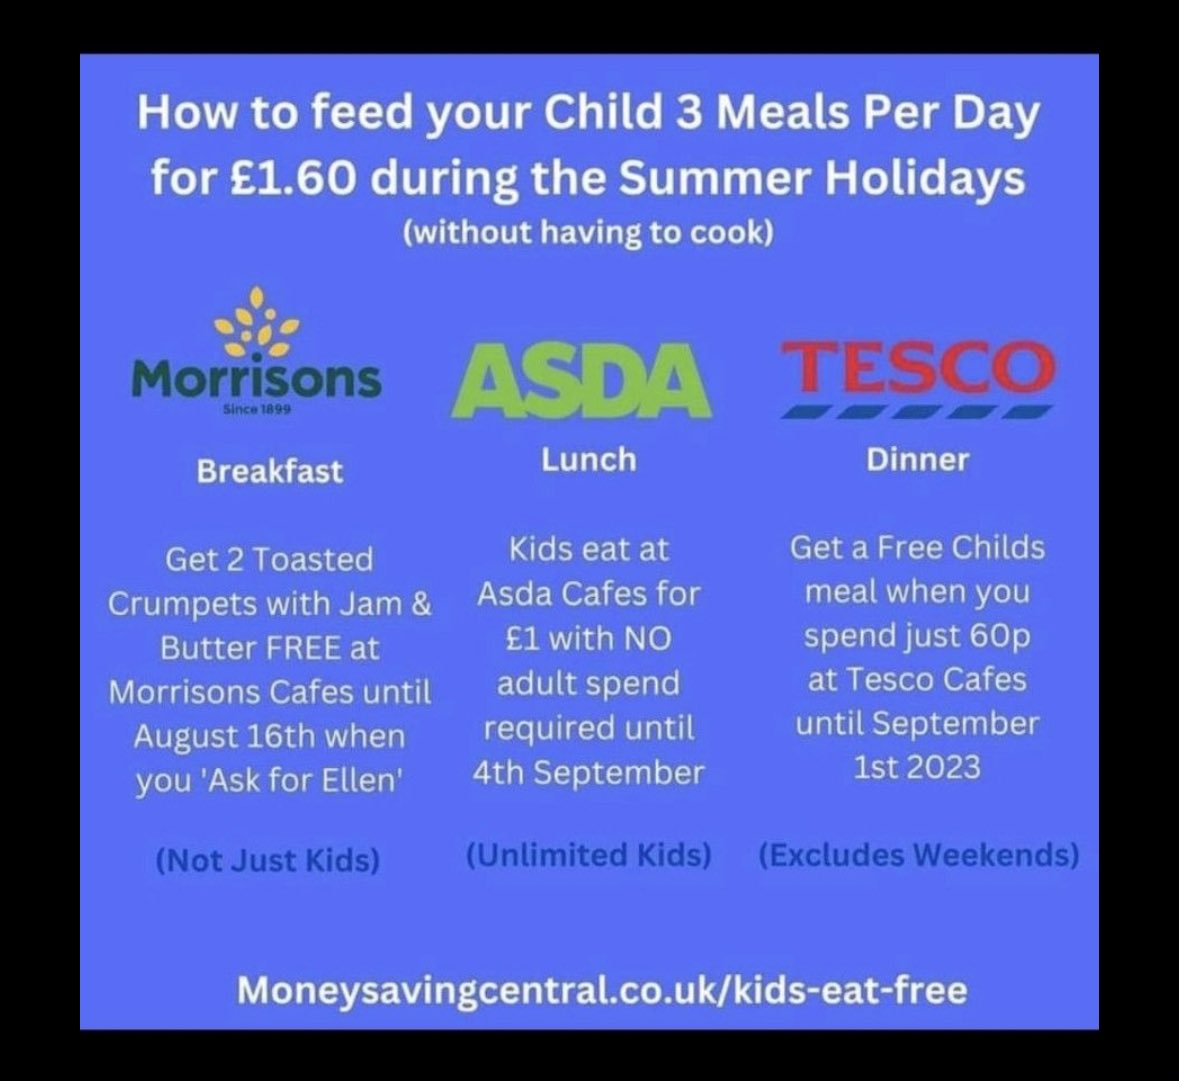 A little something for the parents and carers out there. 
#SummerHolidays #HowTo #everylittlehelps #nocookingrequired